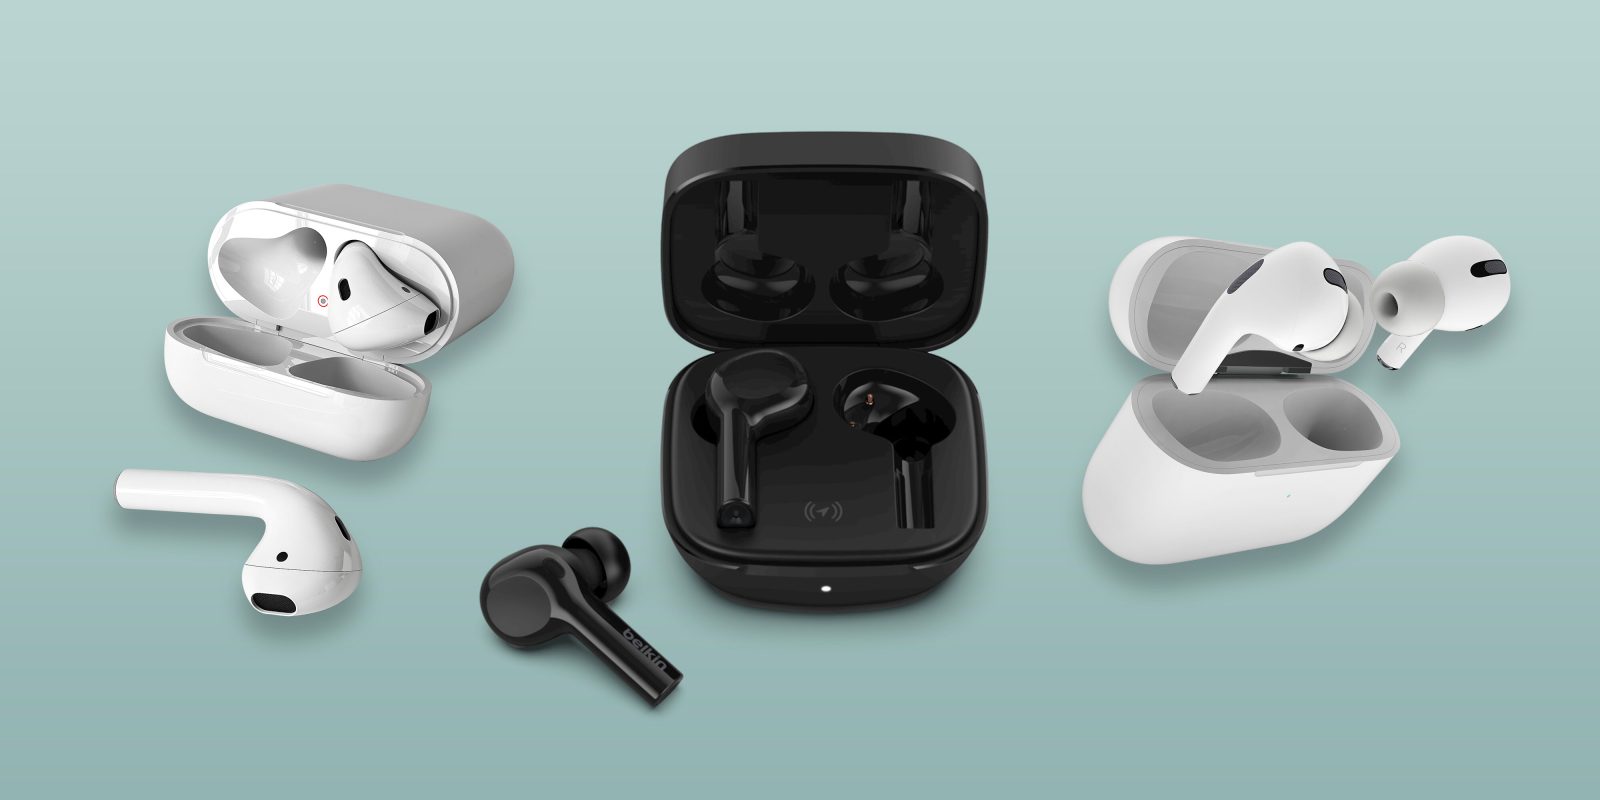 Belkin Soundform Freedom vs AirPods, AirPods Pro